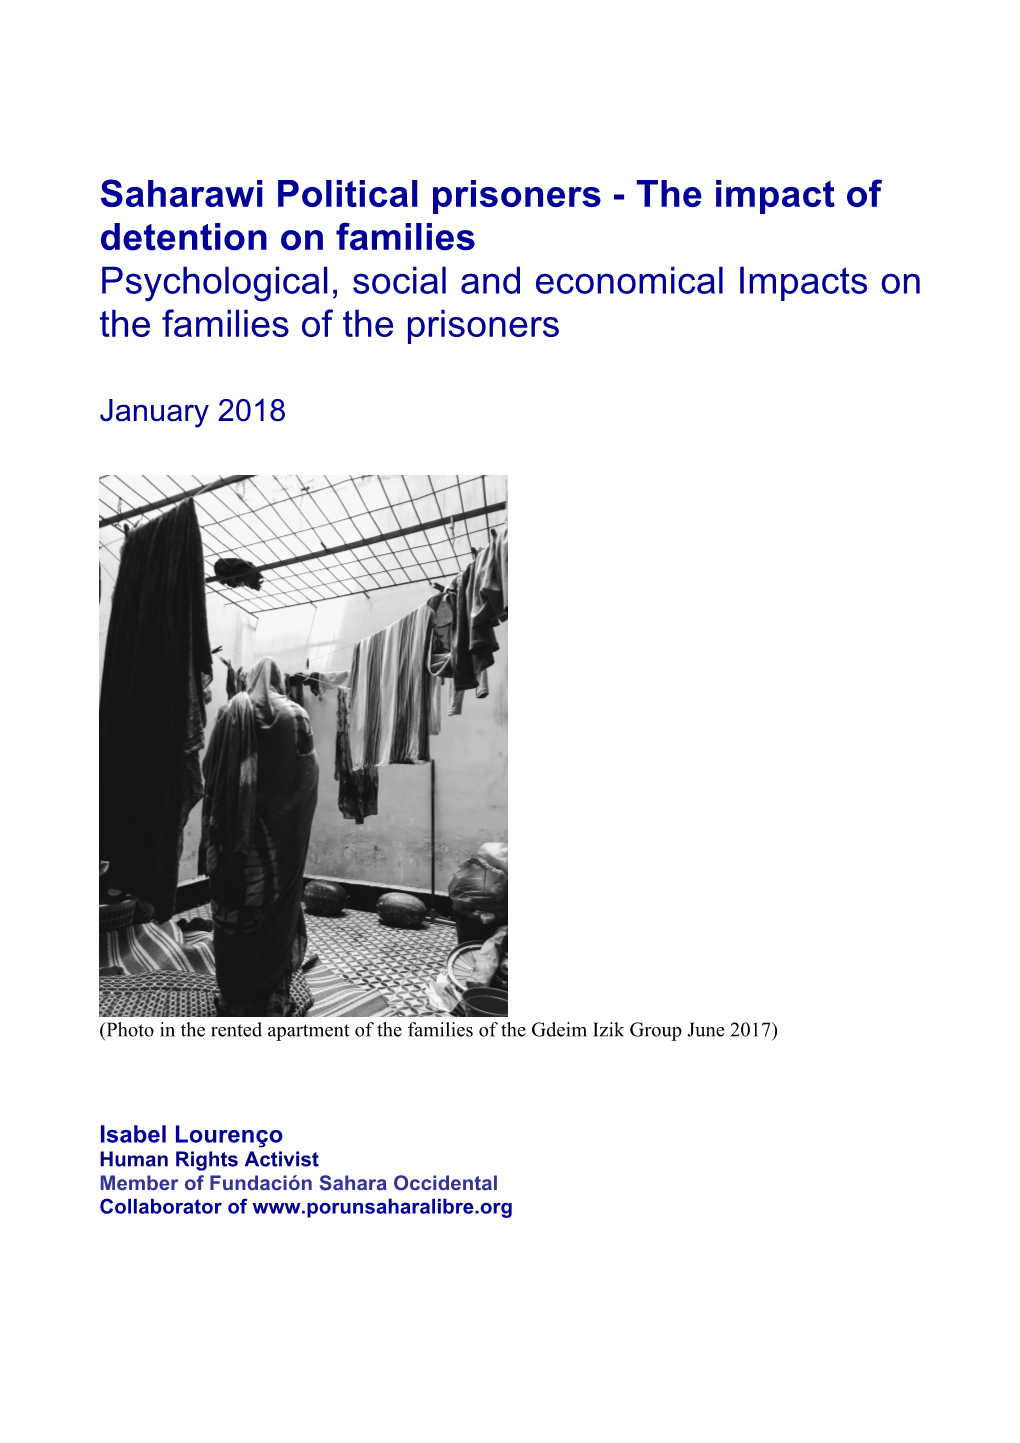 Saharawi Political Prisoners - the Impact of Detention on Families Psychological, Social and Economical Impacts on the Families of the Prisoners